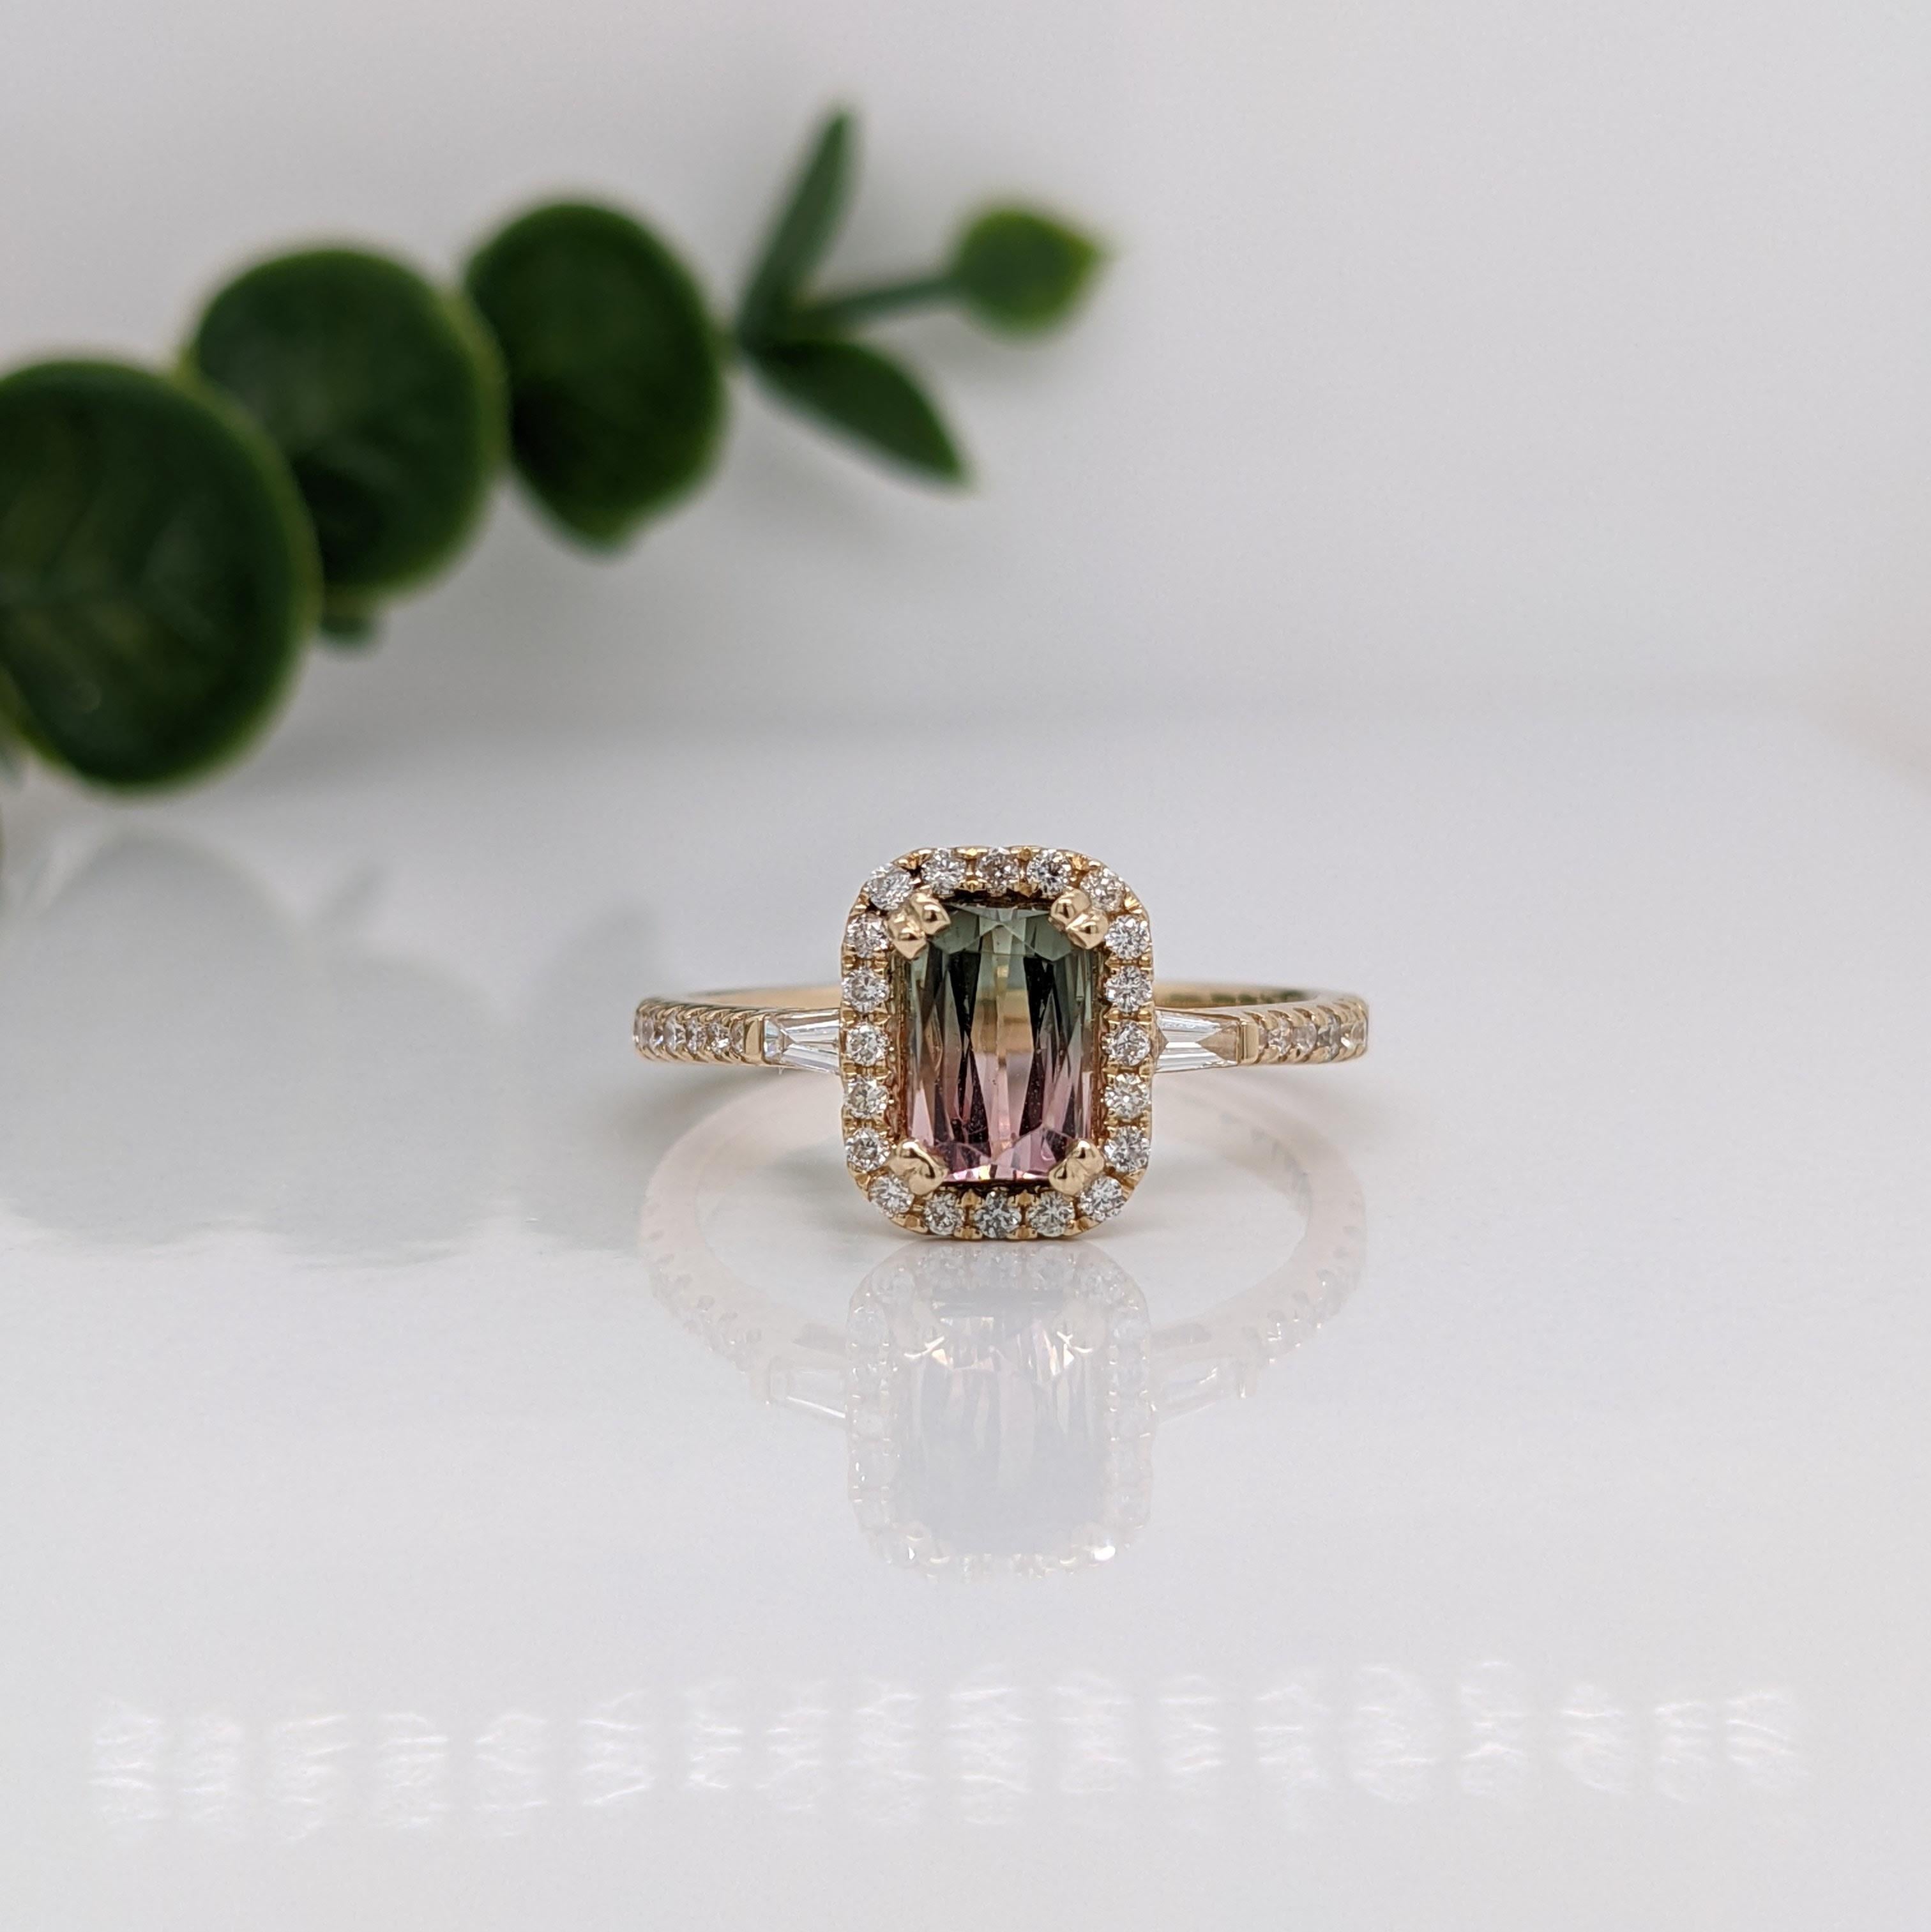 This stunning scissor cut bi-color tourmaline blends pink and green in an absolutely captivating ring with a shimmering diamond halo in 14k yellow gold. Great as a statement piece for any formal event!

Item Type: Ring

Stone: Tourmaline
Stone size: